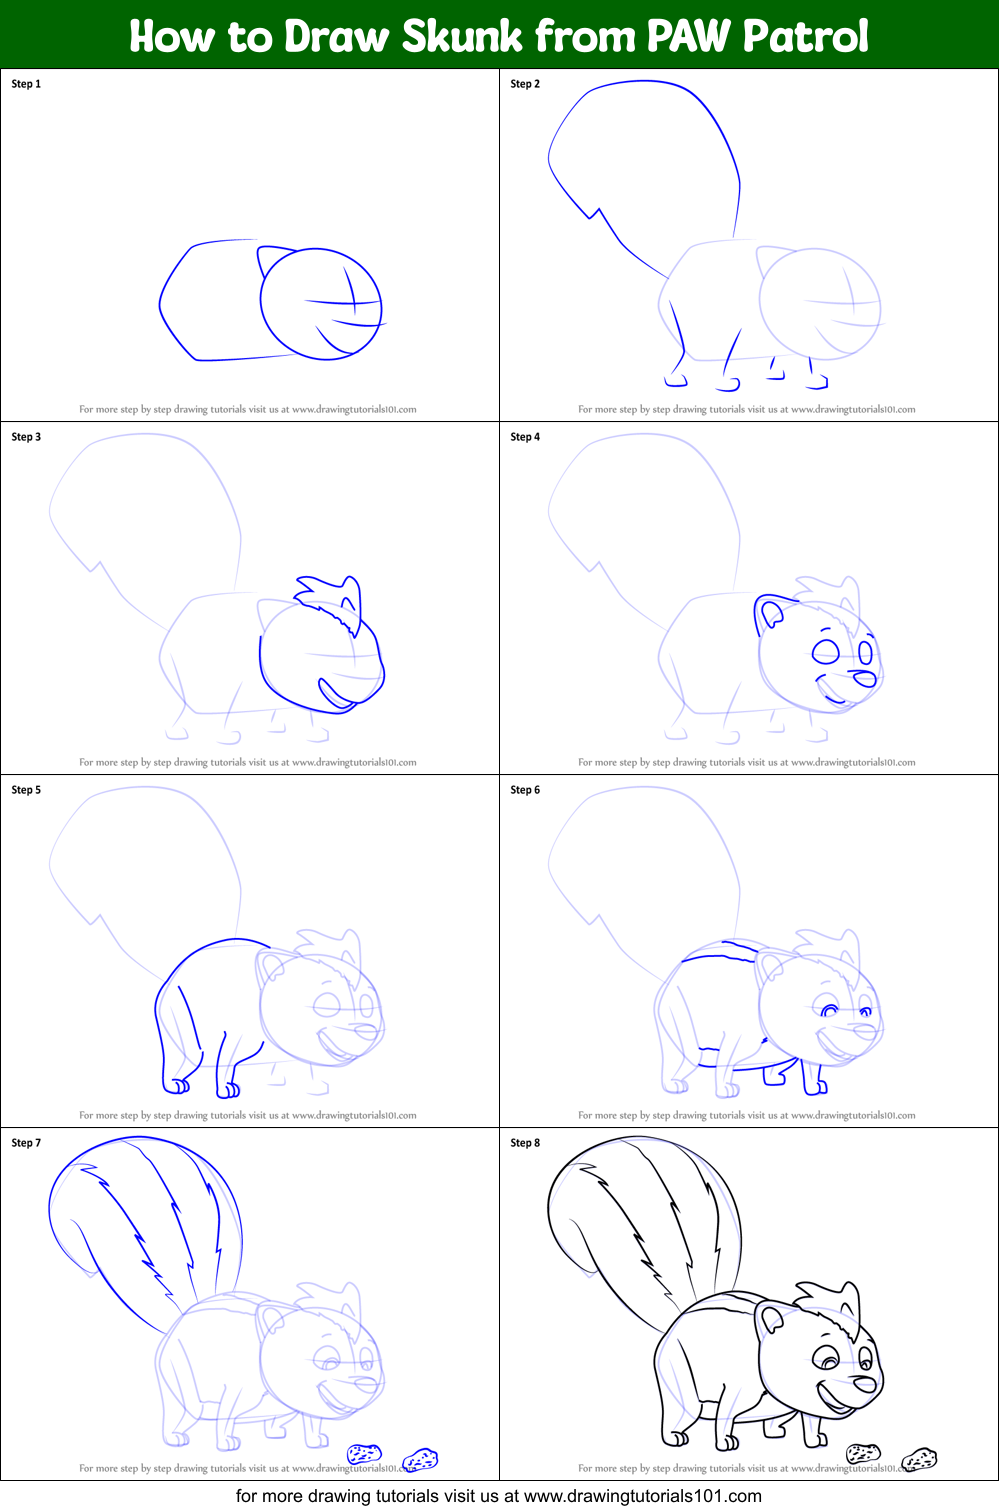 How to Draw Skunk from PAW Patrol printable step by step